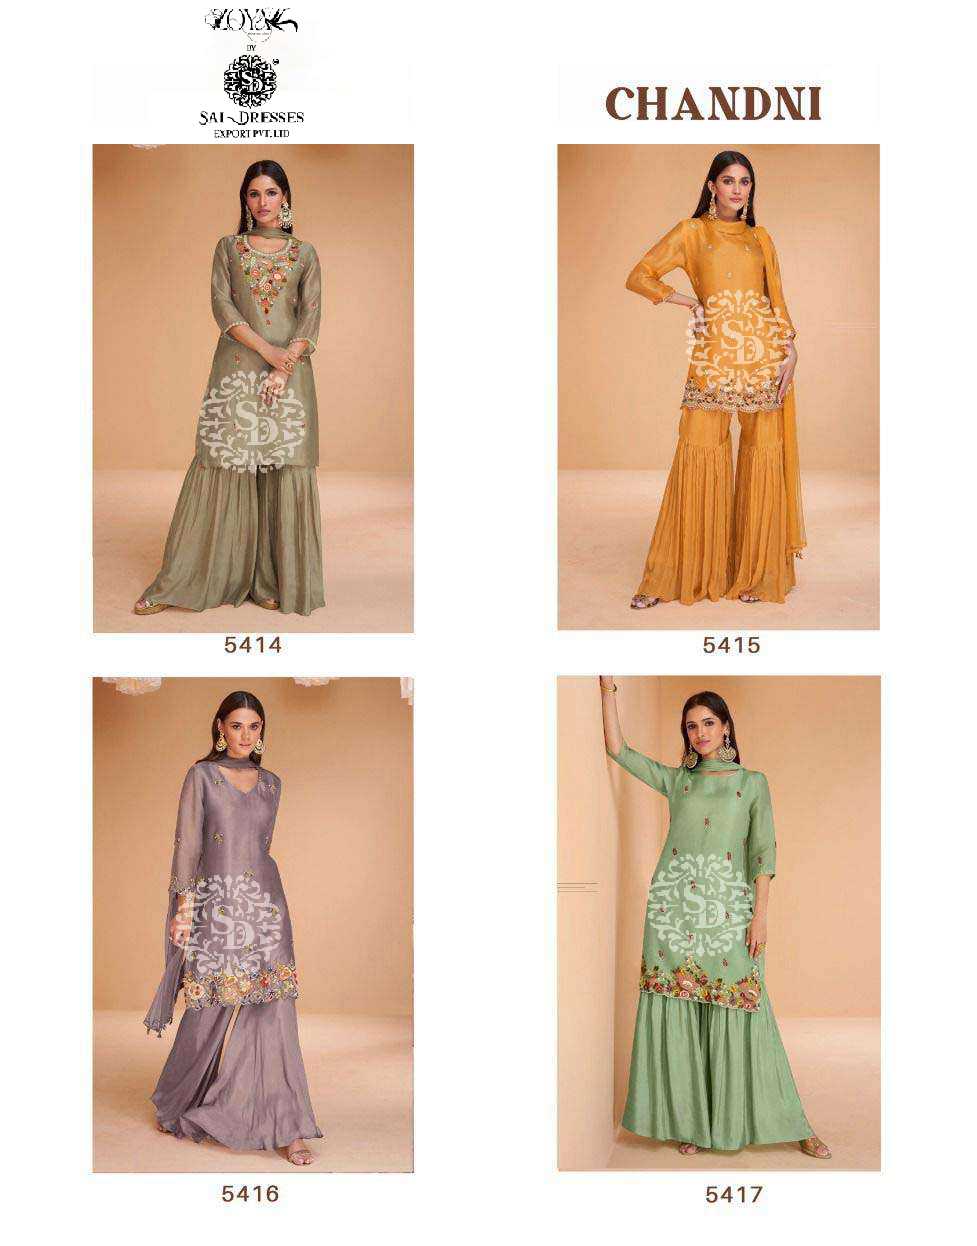 CHANDANI READYMADE ETHNIC WEAR STRAIGHT CUT WITH GHARARA STYLE HEAVY DESIGNER SUITS IN WHOLESALE RATE IN SURAT